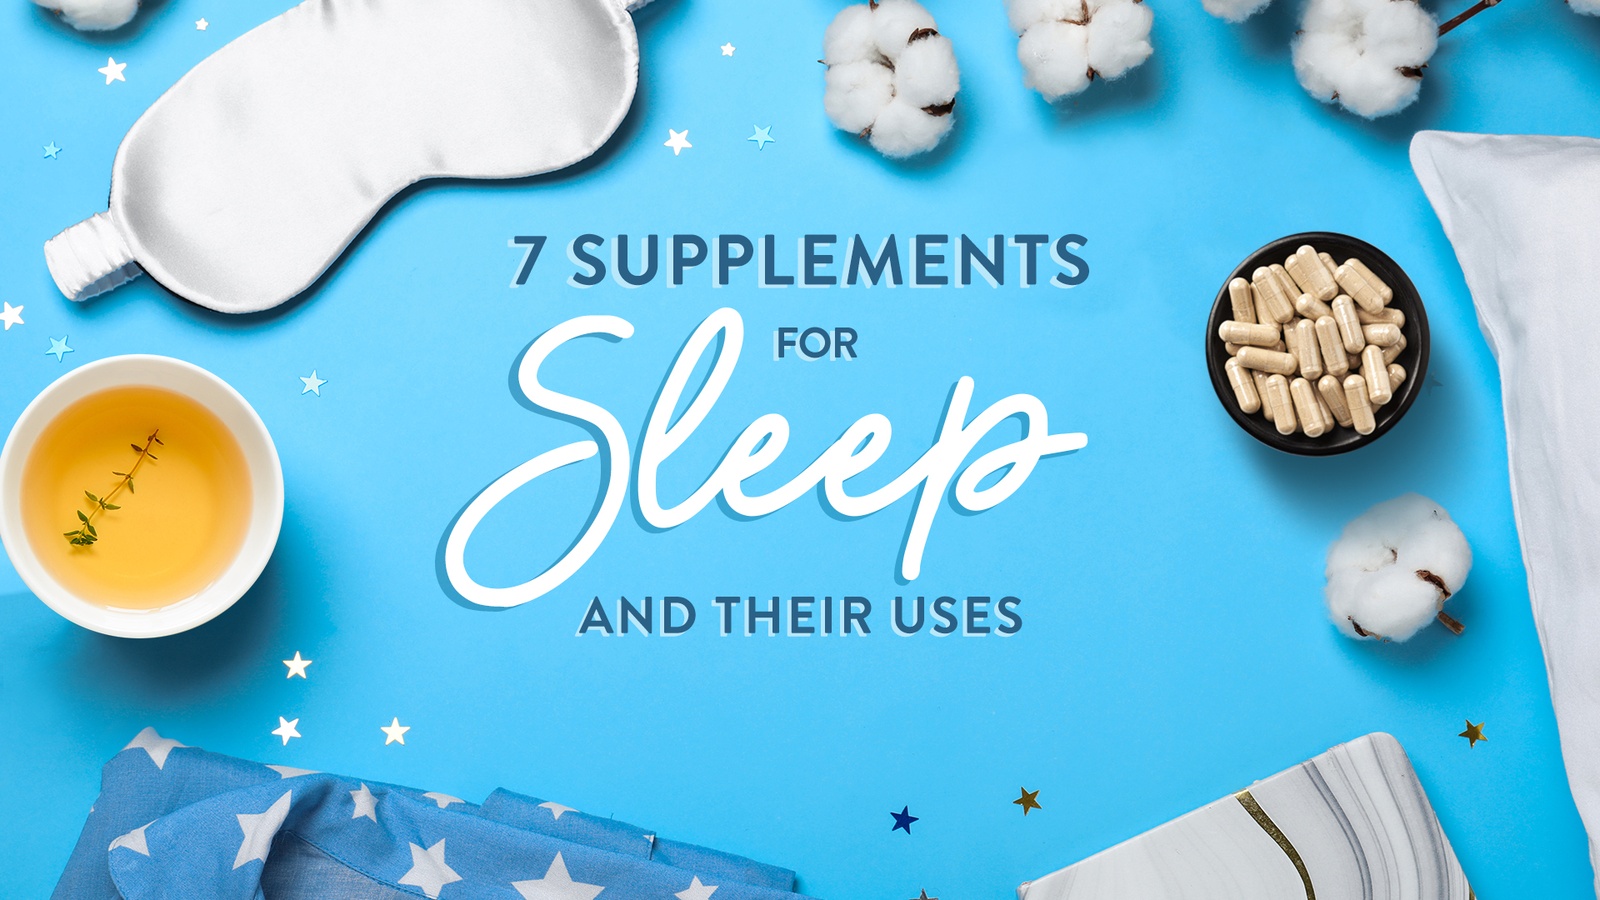 7 Natural Supplements for Sleep and Their Uses